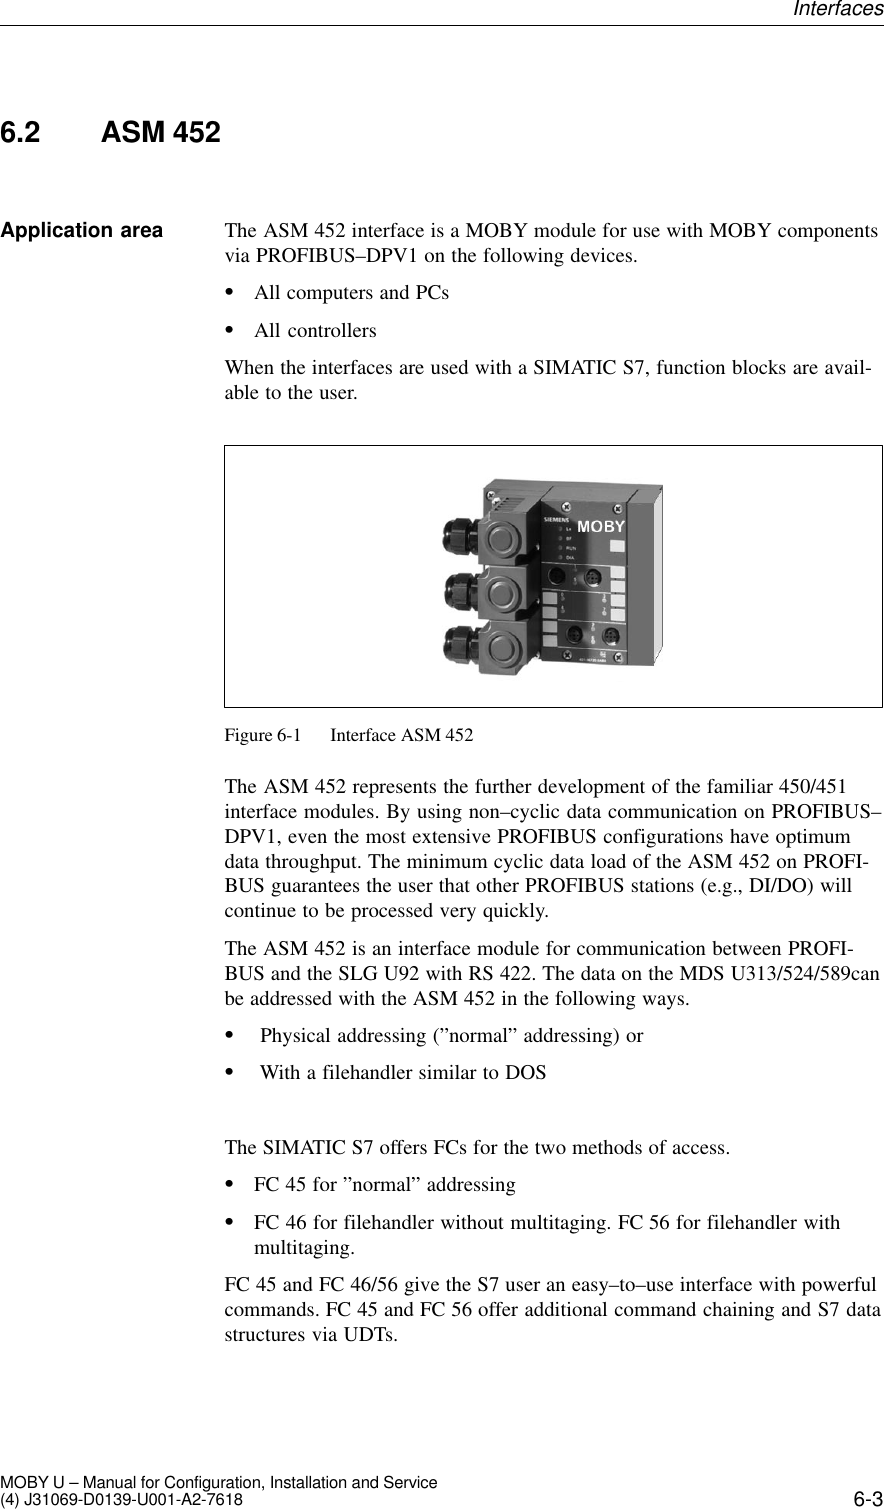 6-3MOBY U – Manual for Configuration, Installation and Service(4) J31069-D0139-U001-A2-76186.2 ASM 452The ASM 452 interface is a MOBY module for use with MOBY componentsvia PROFIBUS–DPV1 on the following devices.SAll computers and PCsSAll controllersWhen the interfaces are used with a SIMATIC S7, function blocks are avail-able to the user.Figure 6-1 Interface ASM 452The ASM 452 represents the further development of the familiar 450/451interface modules. By using non–cyclic data communication on PROFIBUS–DPV1, even the most extensive PROFIBUS configurations have optimumdata throughput. The minimum cyclic data load of the ASM 452 on PROFI-BUS guarantees the user that other PROFIBUS stations (e.g., DI/DO) willcontinue to be processed very quickly.The ASM 452 is an interface module for communication between PROFI-BUS and the SLG U92 with RS 422. The data on the MDS U313/524/589canbe addressed with the ASM 452 in the following ways.S Physical addressing (”normal” addressing) orS With a filehandler similar to DOSThe SIMATIC S7 offers FCs for the two methods of access.SFC 45 for ”normal” addressingSFC 46 for filehandler without multitaging. FC 56 for filehandler withmultitaging.FC 45 and FC 46/56 give the S7 user an easy–to–use interface with powerfulcommands. FC 45 and FC 56 offer additional command chaining and S7 datastructures via UDTs.Application areaInterfaces